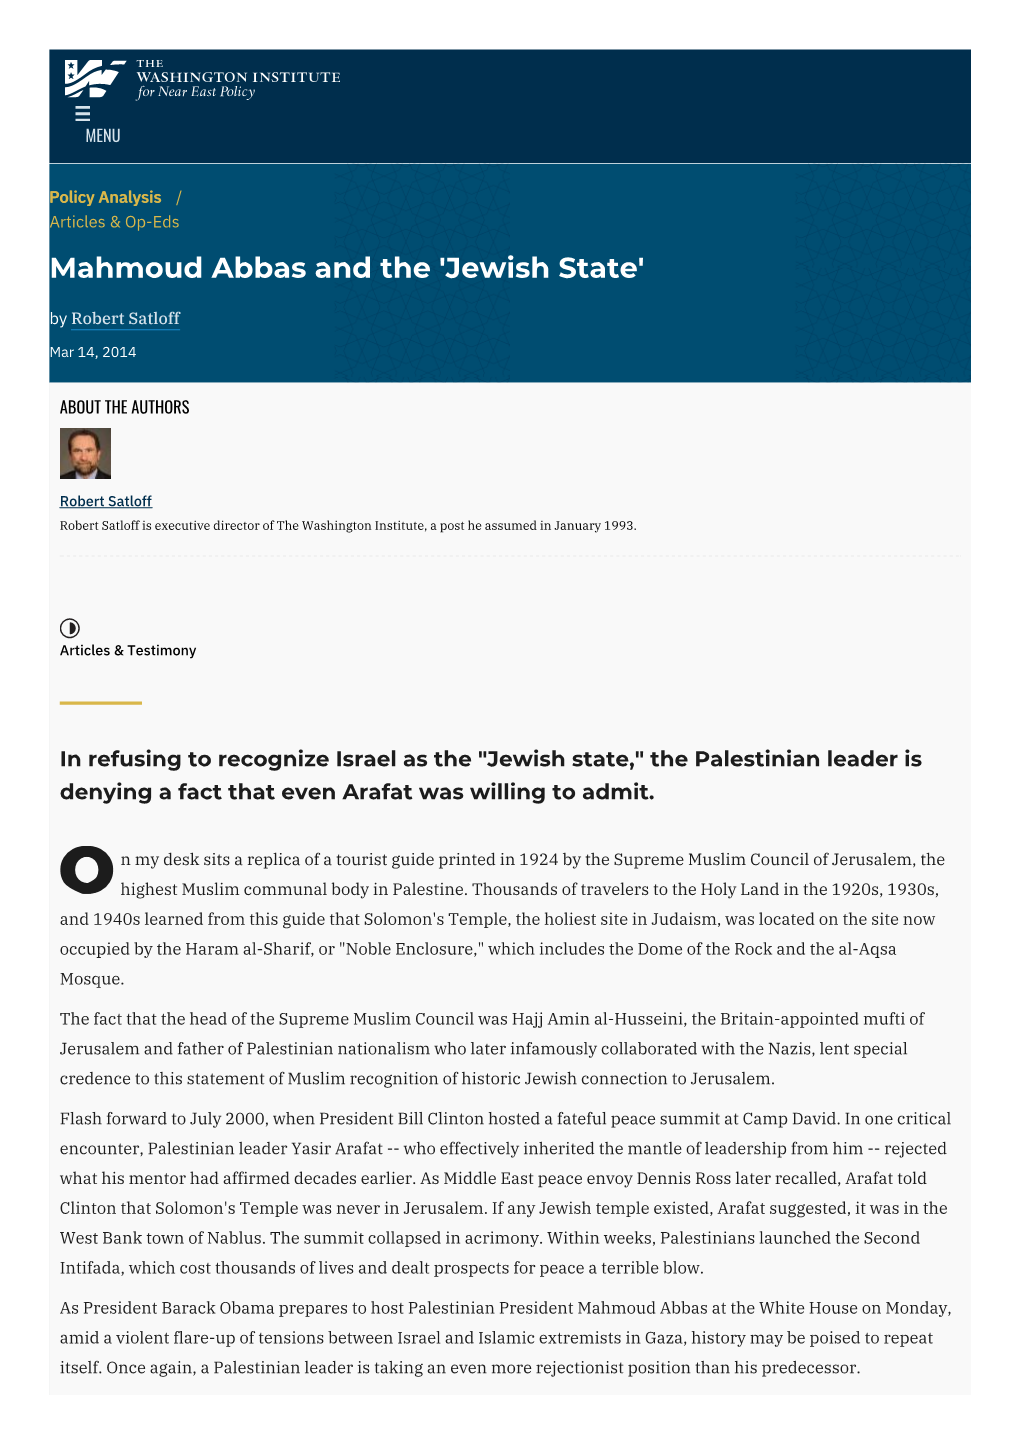 Mahmoud Abbas and the 'Jewish State' | the Washington Institute